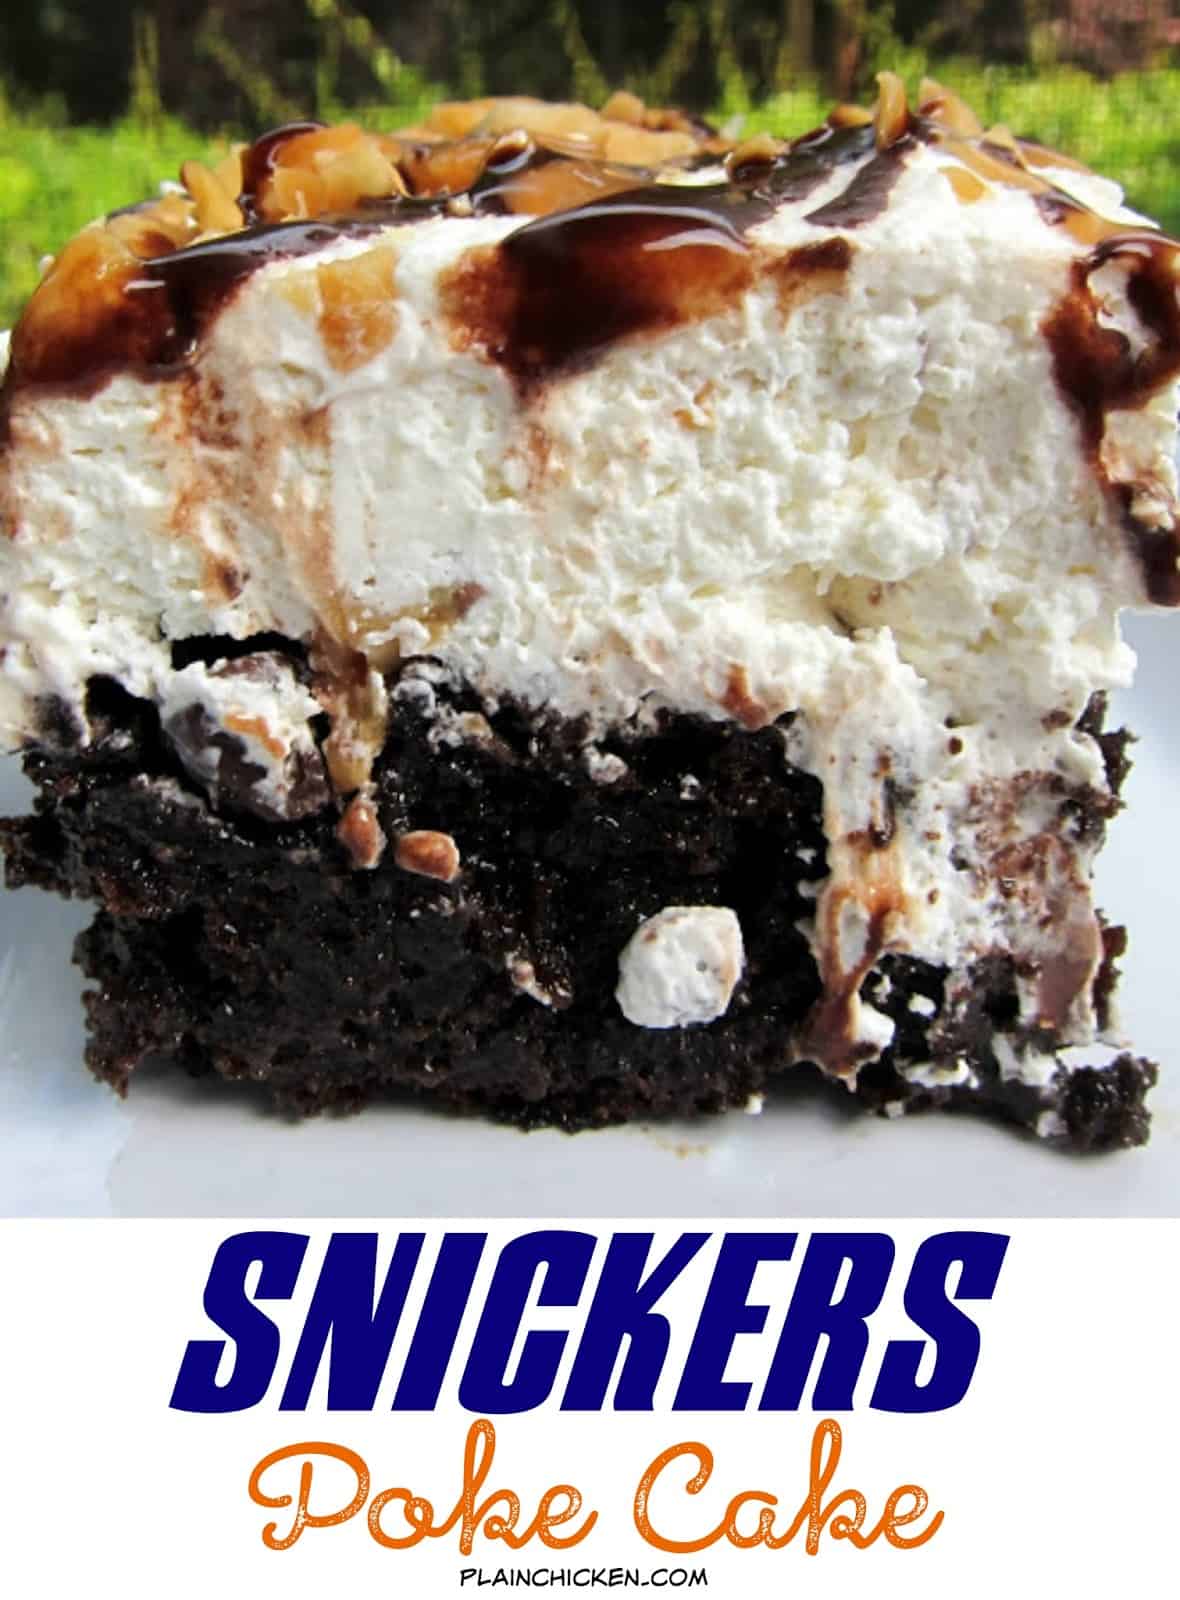 Snickers Poke Cake Recipe - chocolate cake, caramel, whipped cream, peanuts and chocolate sauce - OMG! There is NEVER any left! People go nuts over this cake!!